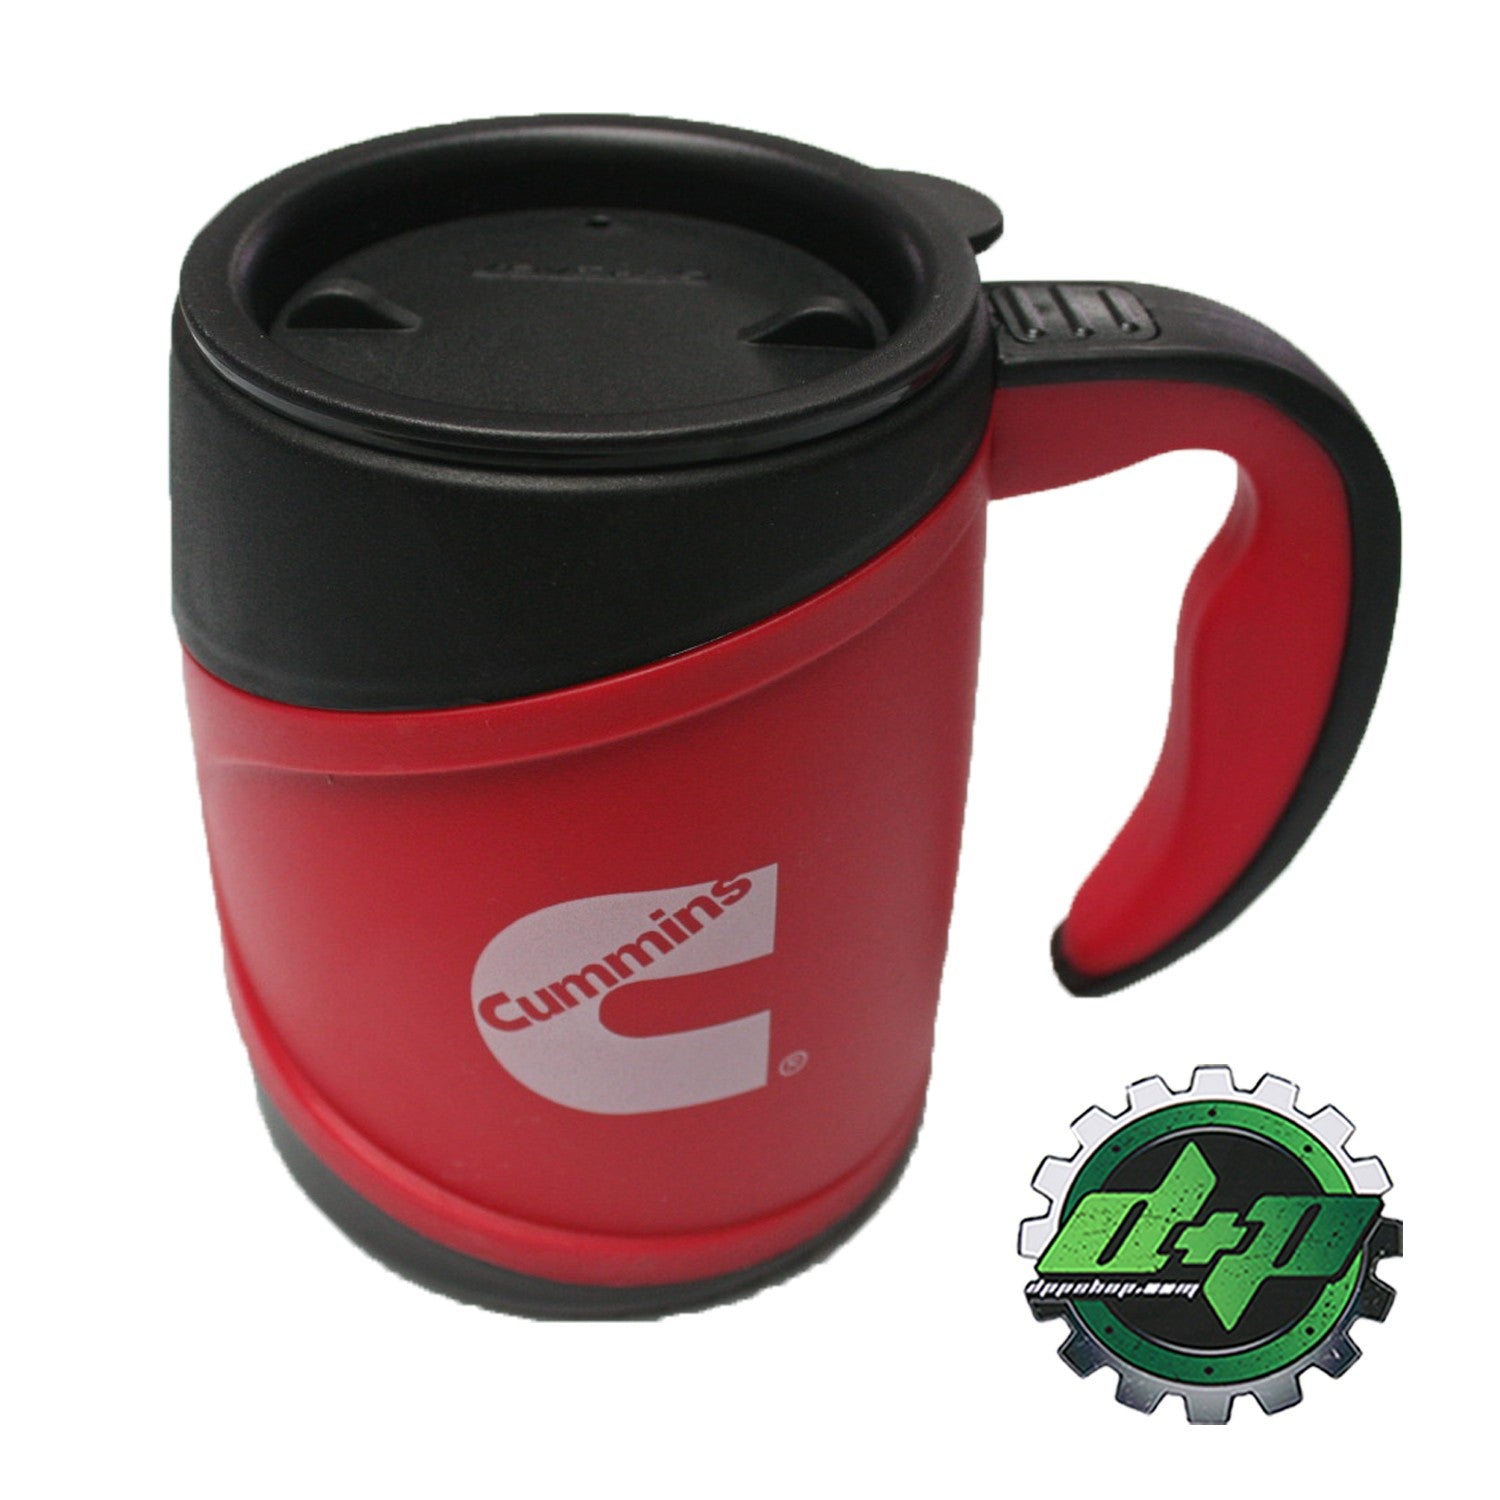 https://cdn.shopify.com/s/files/1/0609/5480/4469/products/cummins-diesel-insulated-coffee-cup-mug-thermos-red-black-hot-cold-12-oz.jpg?v=1636564247